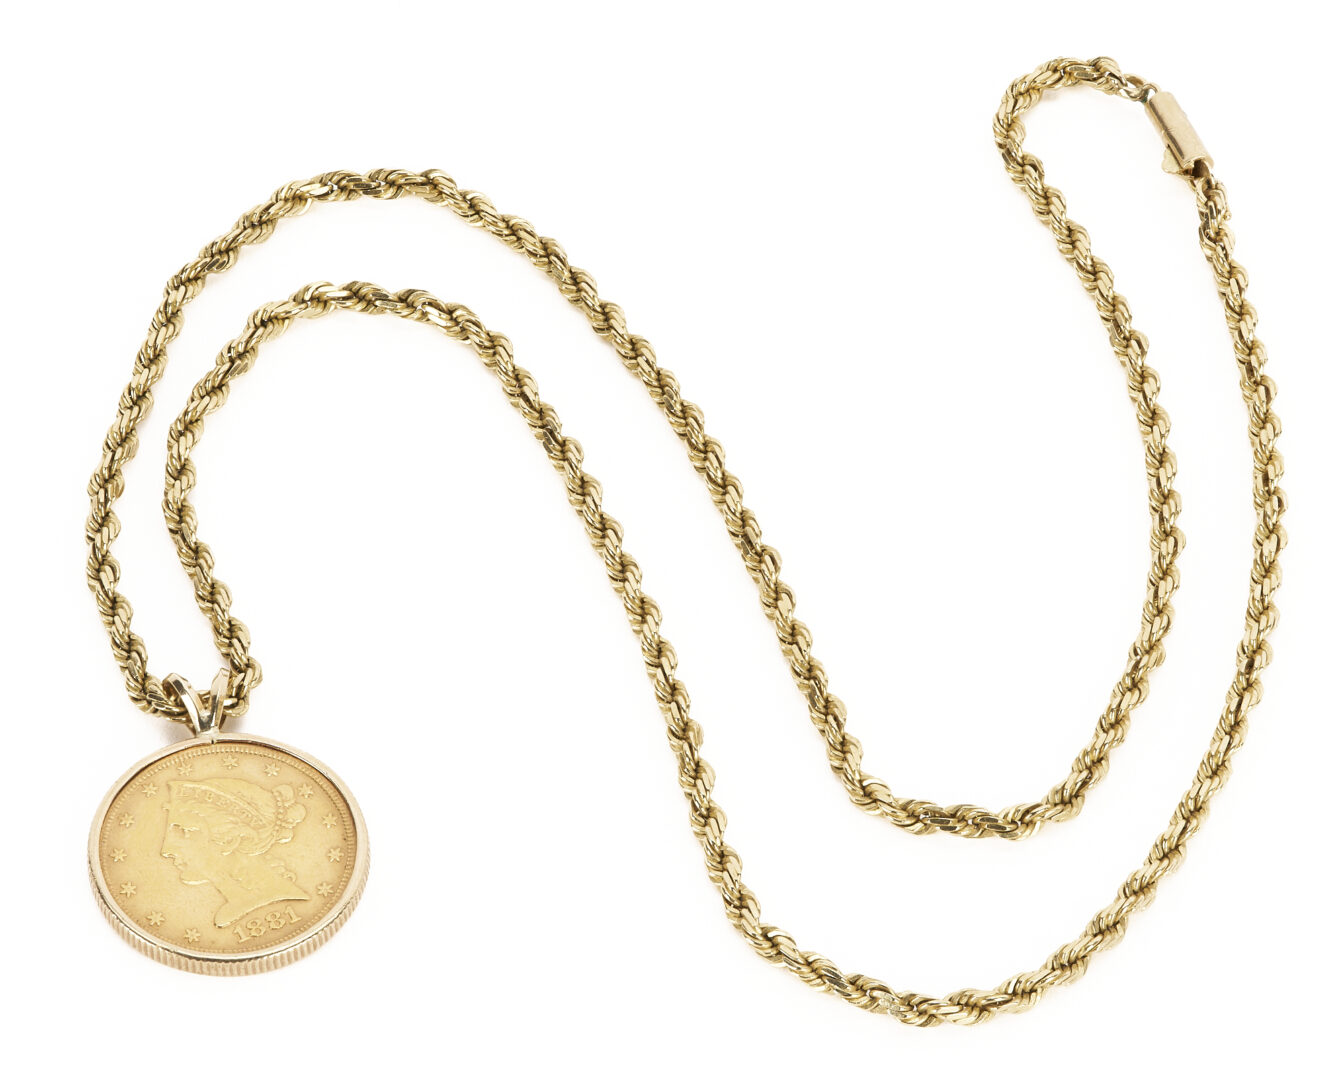 Lot 274: 14K Rope Chain Necklace w/ $5 Liberty Gold Coin Pendant